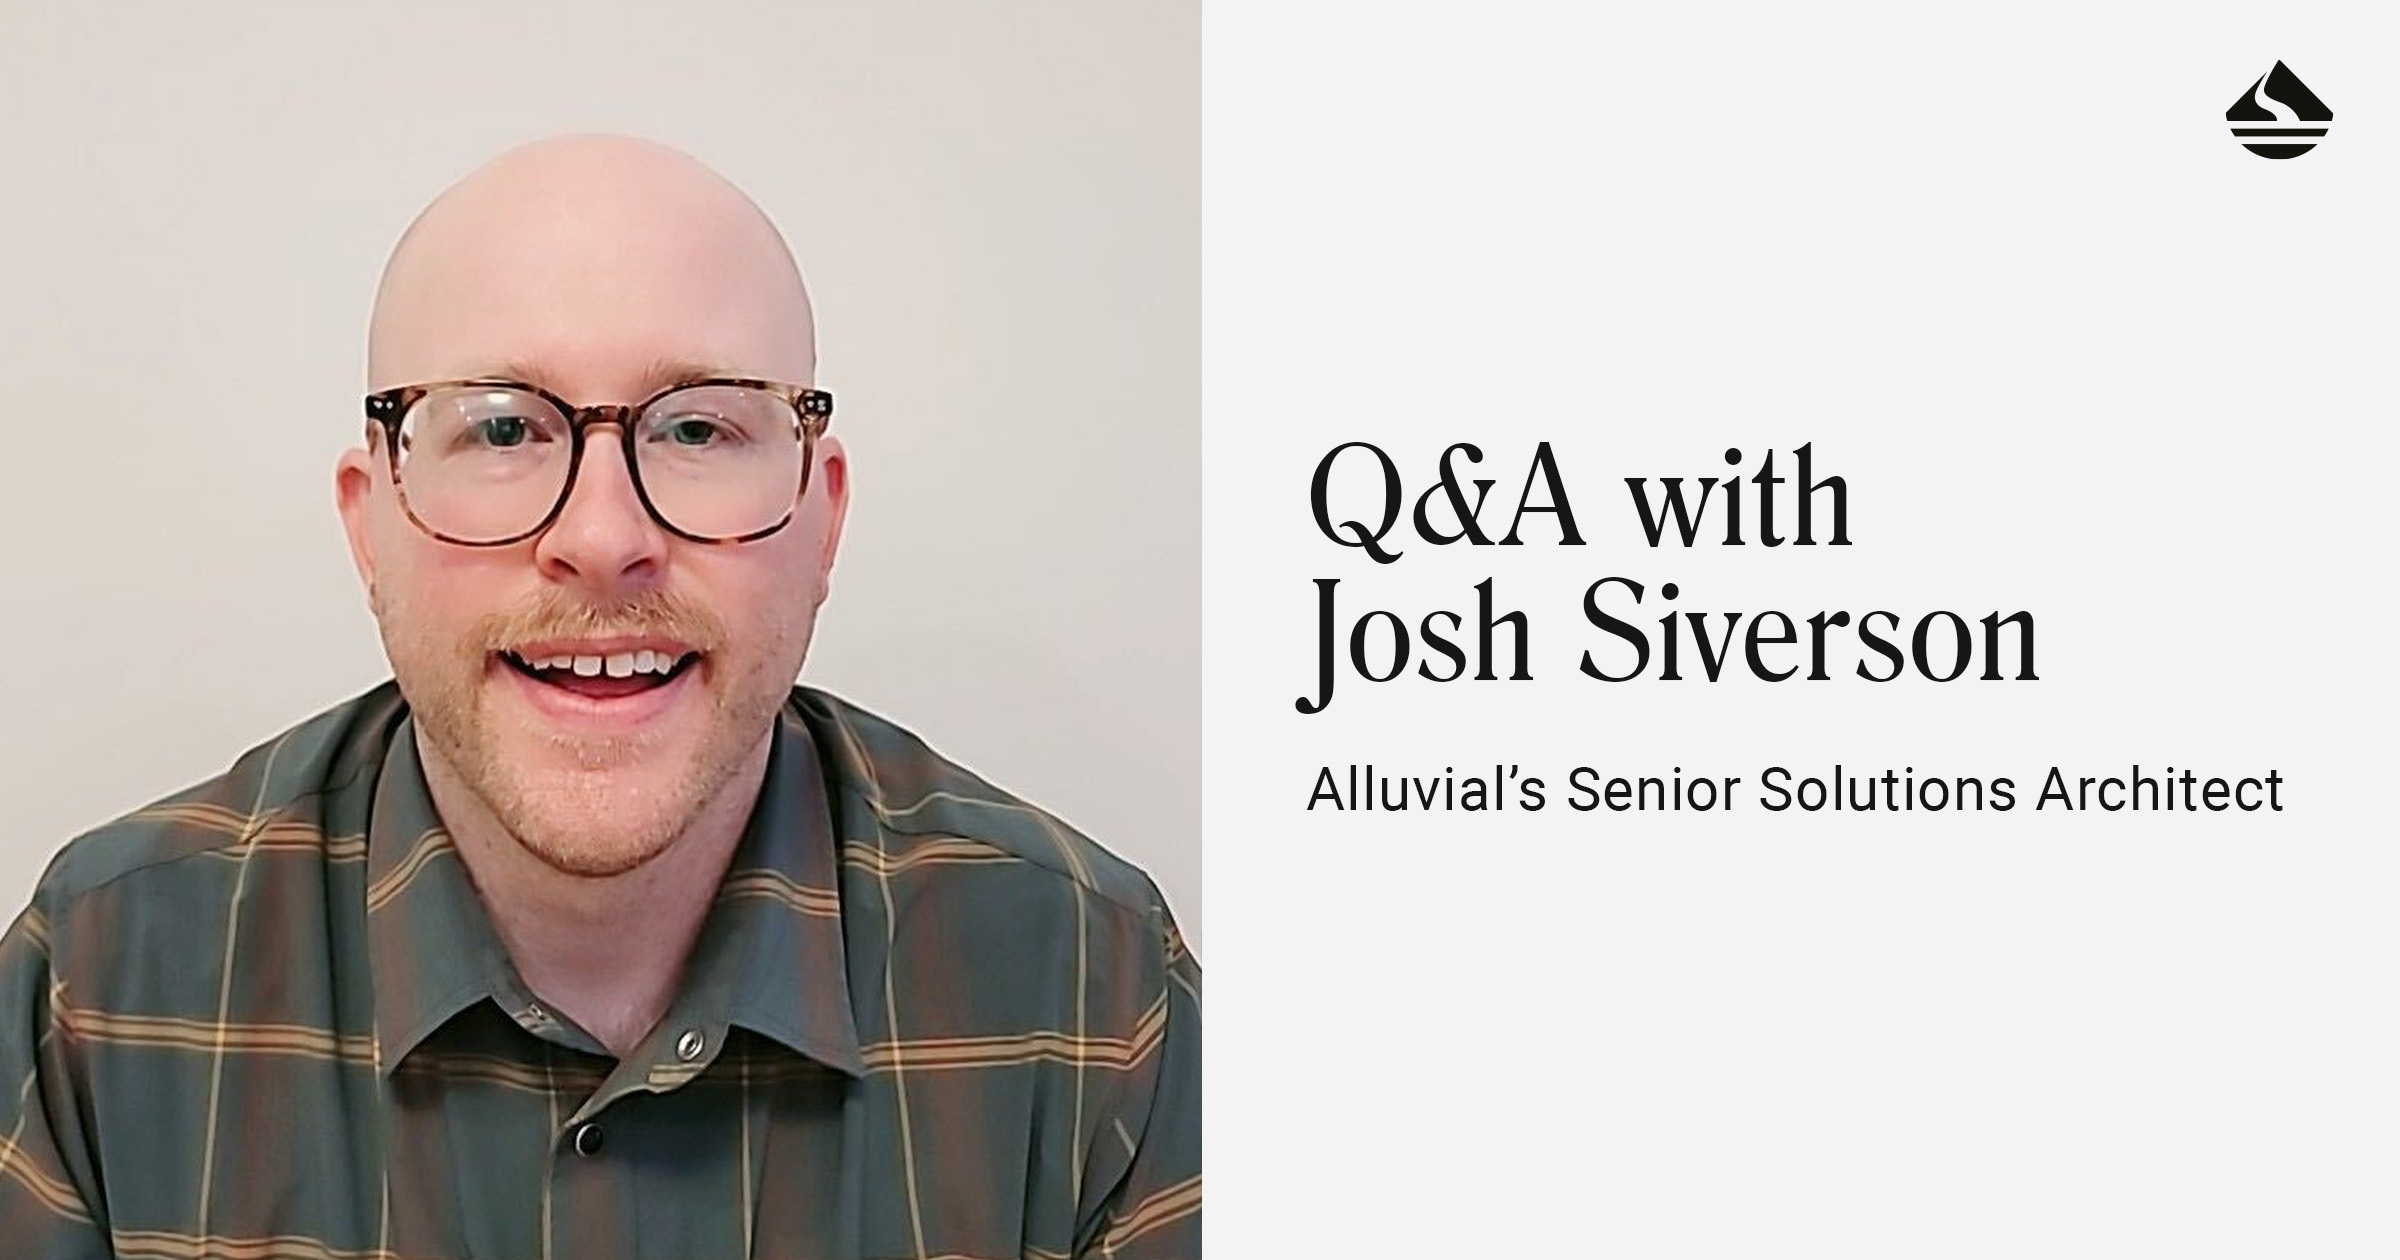 Q&A with with Josh Siverson, Alluvial's Senior Solutions Architect